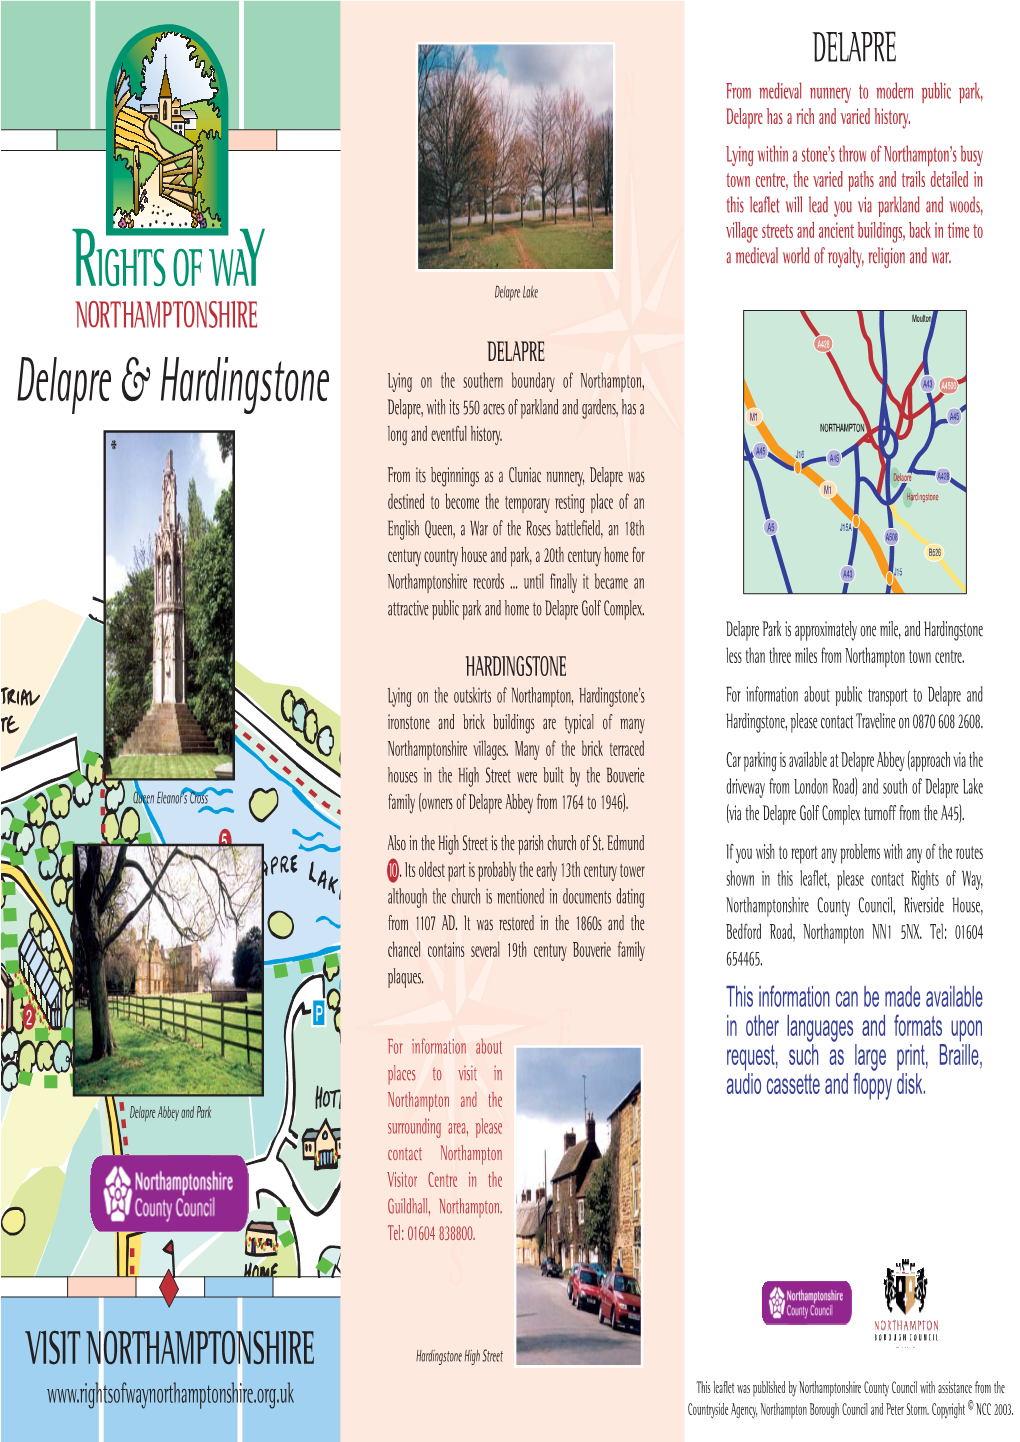 DELAPRE from Medieval Nunnery to Modern Public Park, Delapre Has a Rich and Varied History